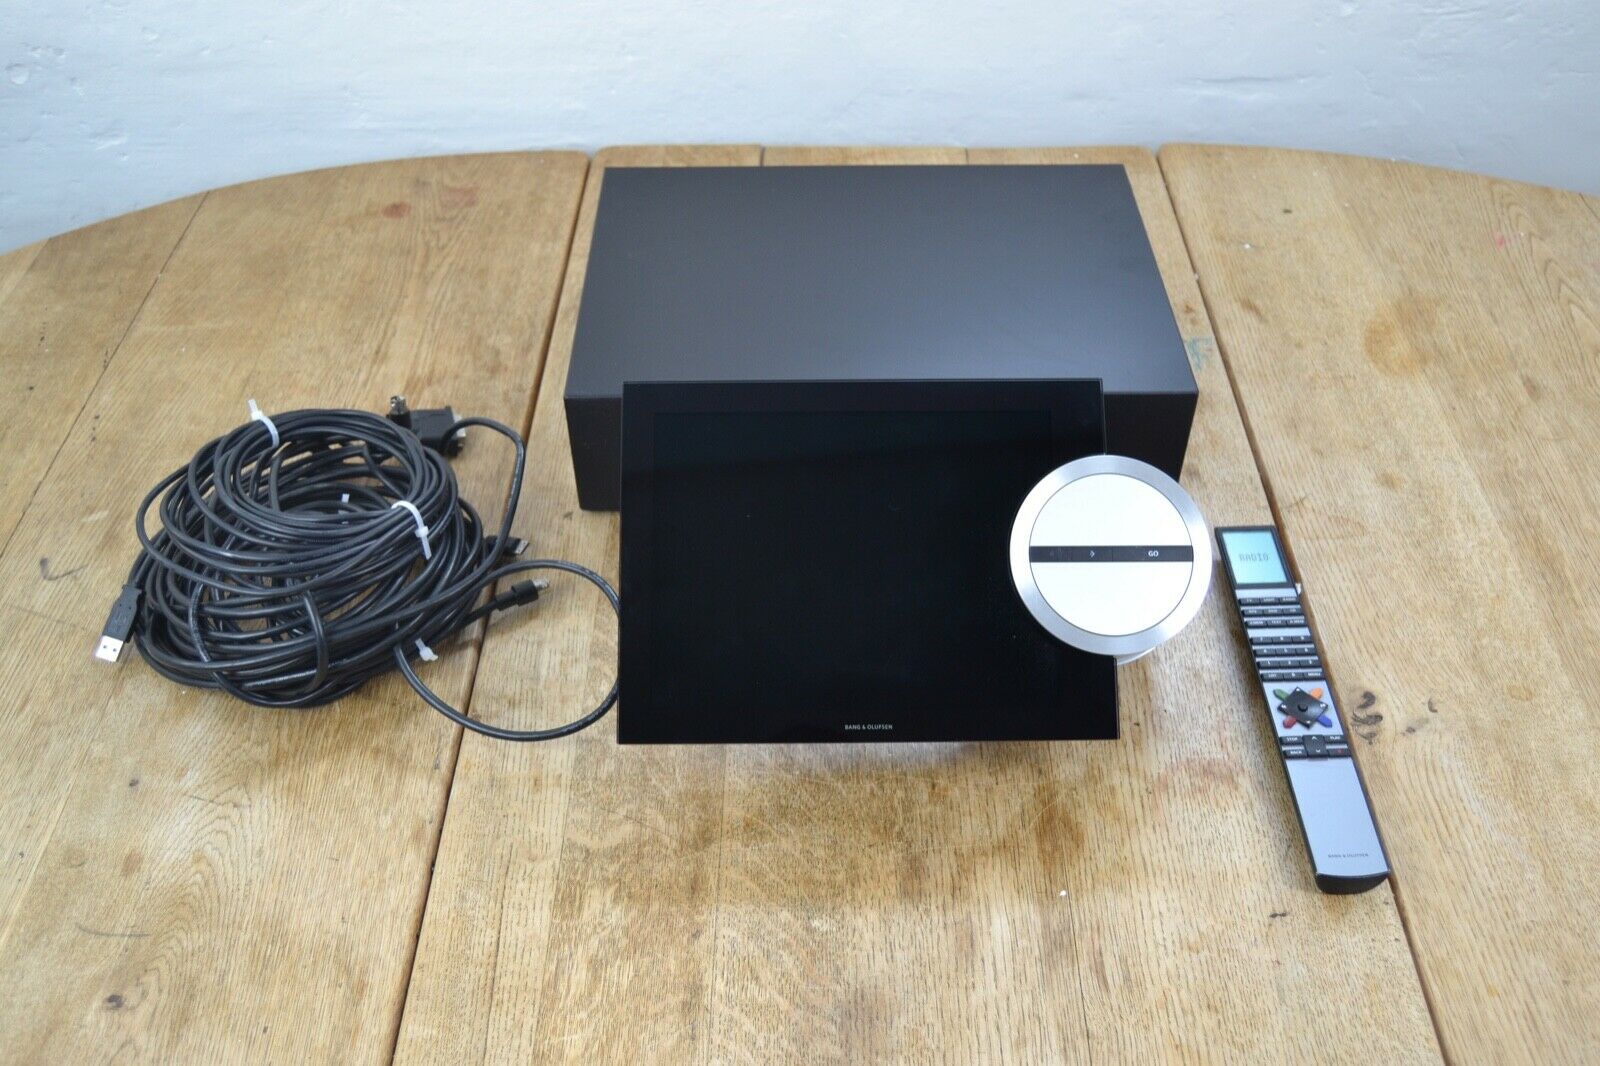 Bang & Olufsen - B&O - Beosound 5 + Table stand + Beomaster 5 + Beo 4 remote